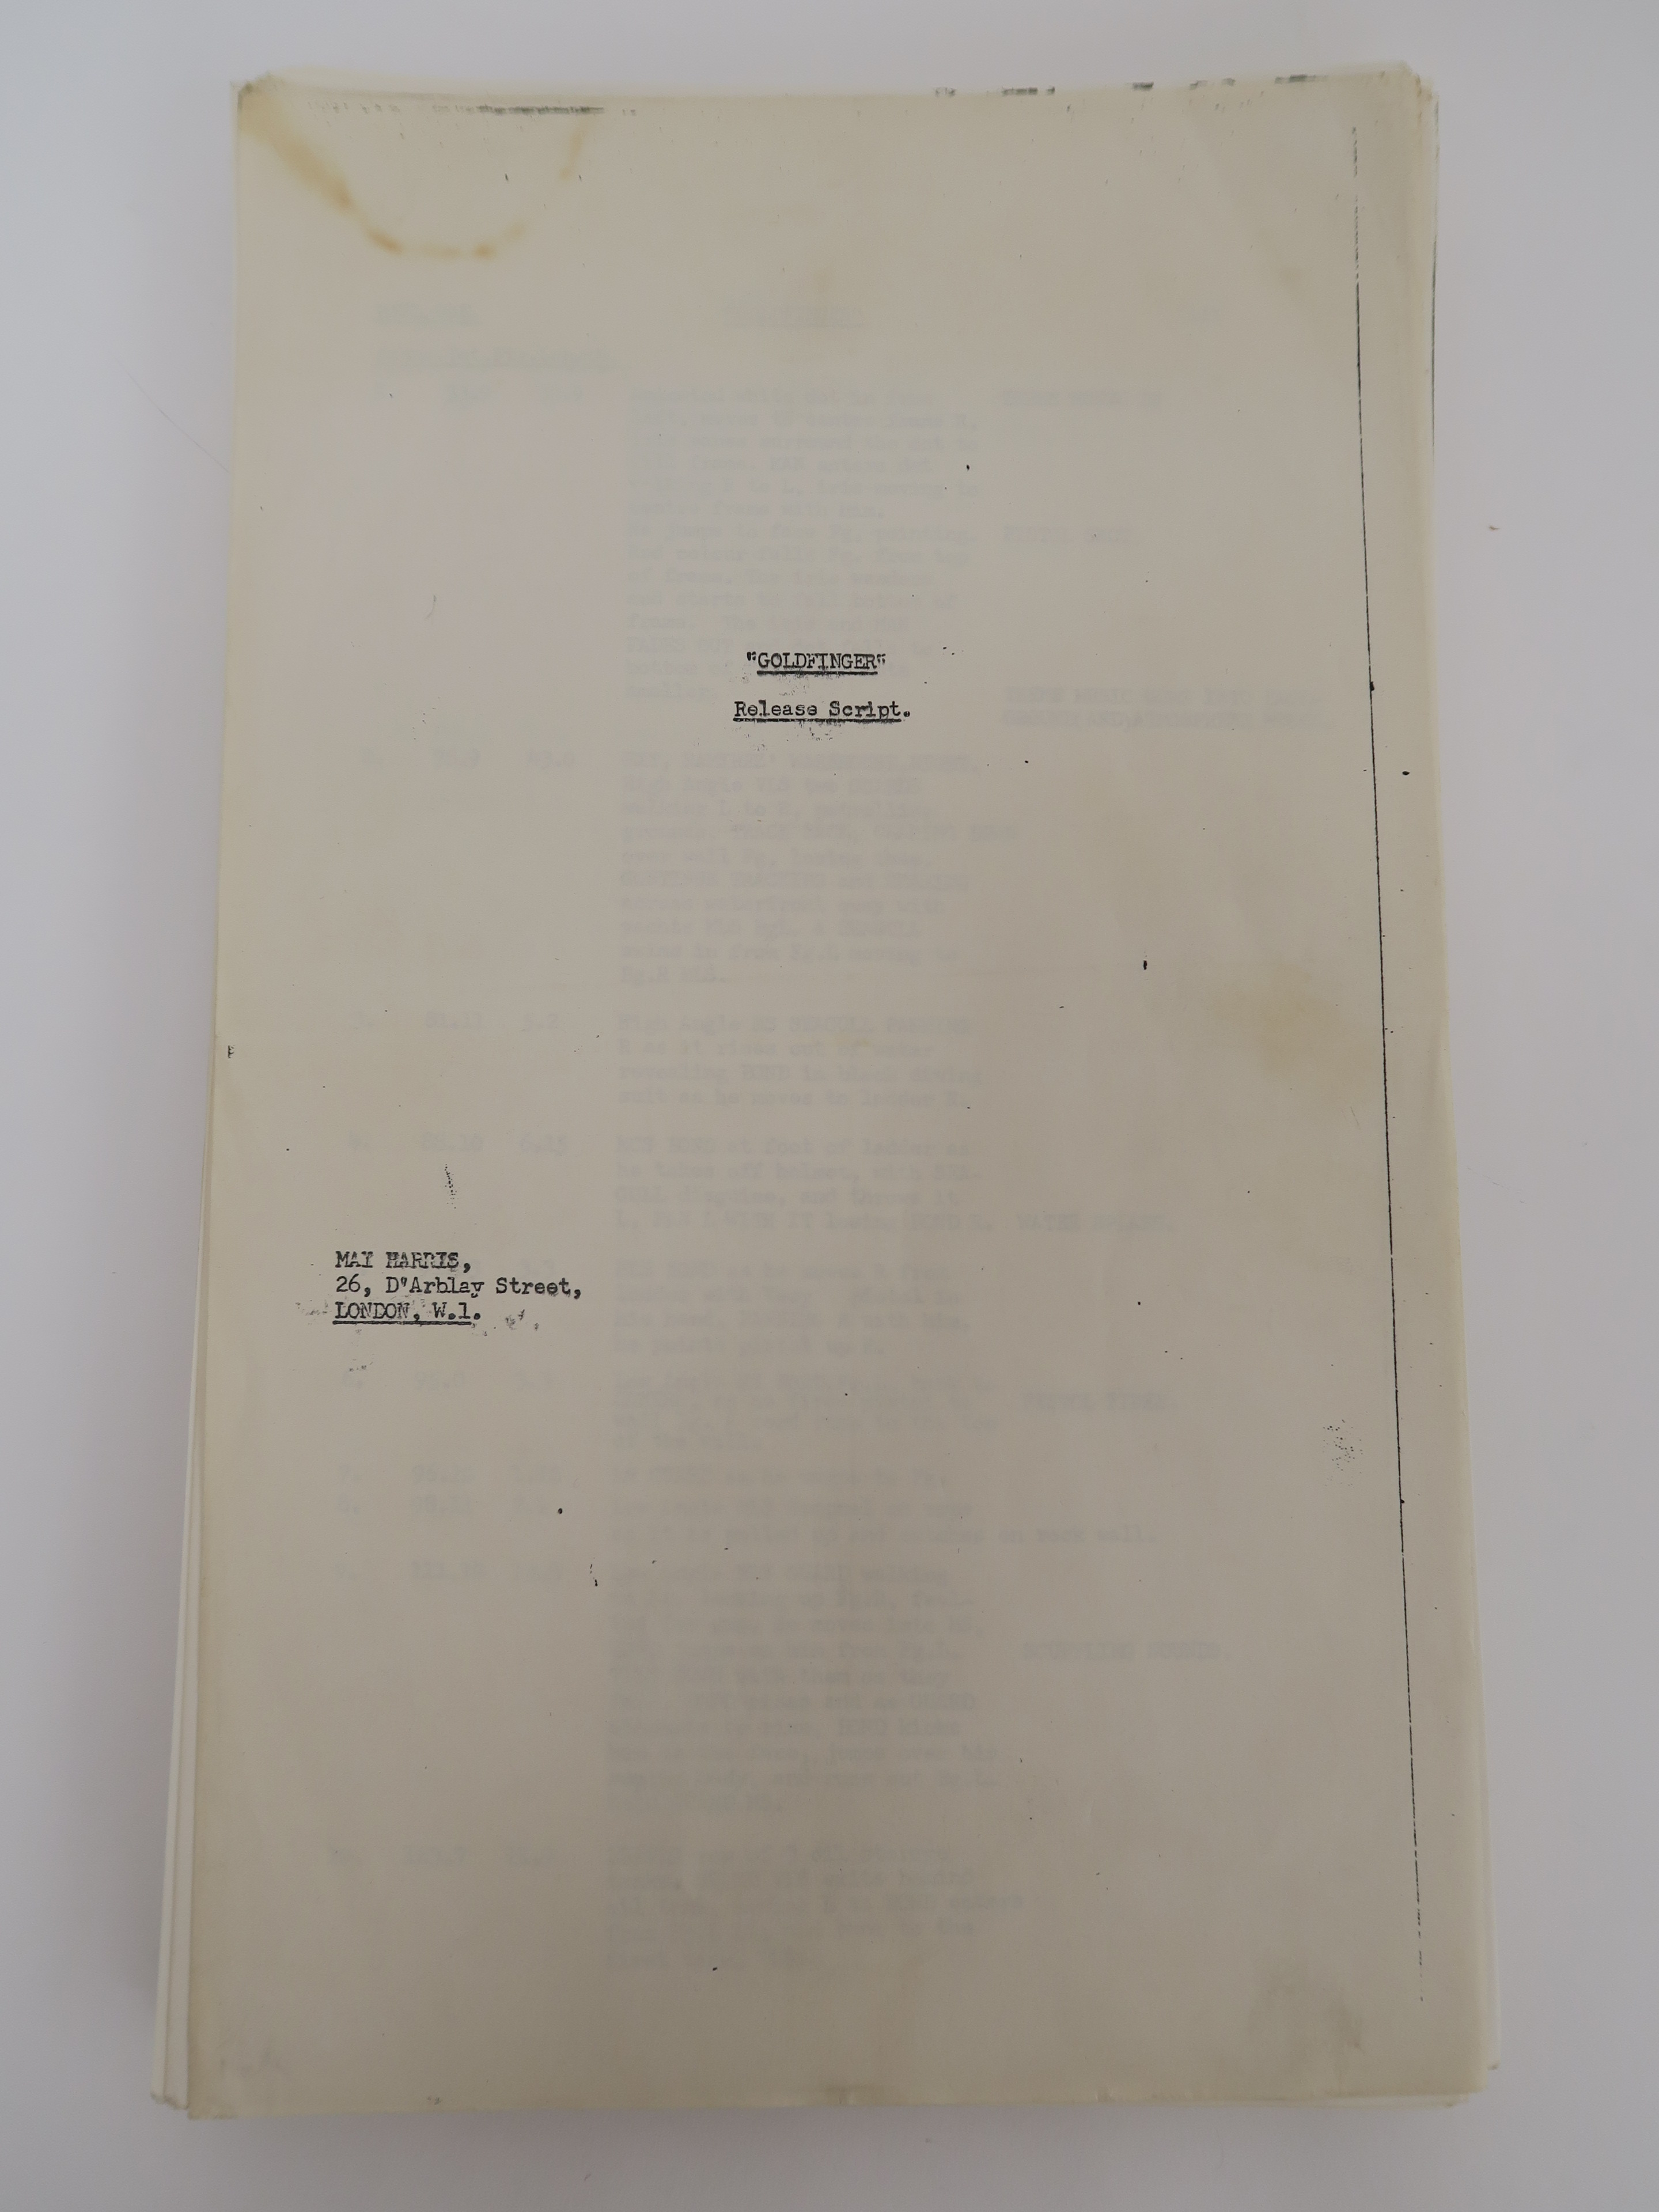 "Goldfinger" 1964 Release script with typed front cover "Mai Harris, 26, DArblay Street, London W.